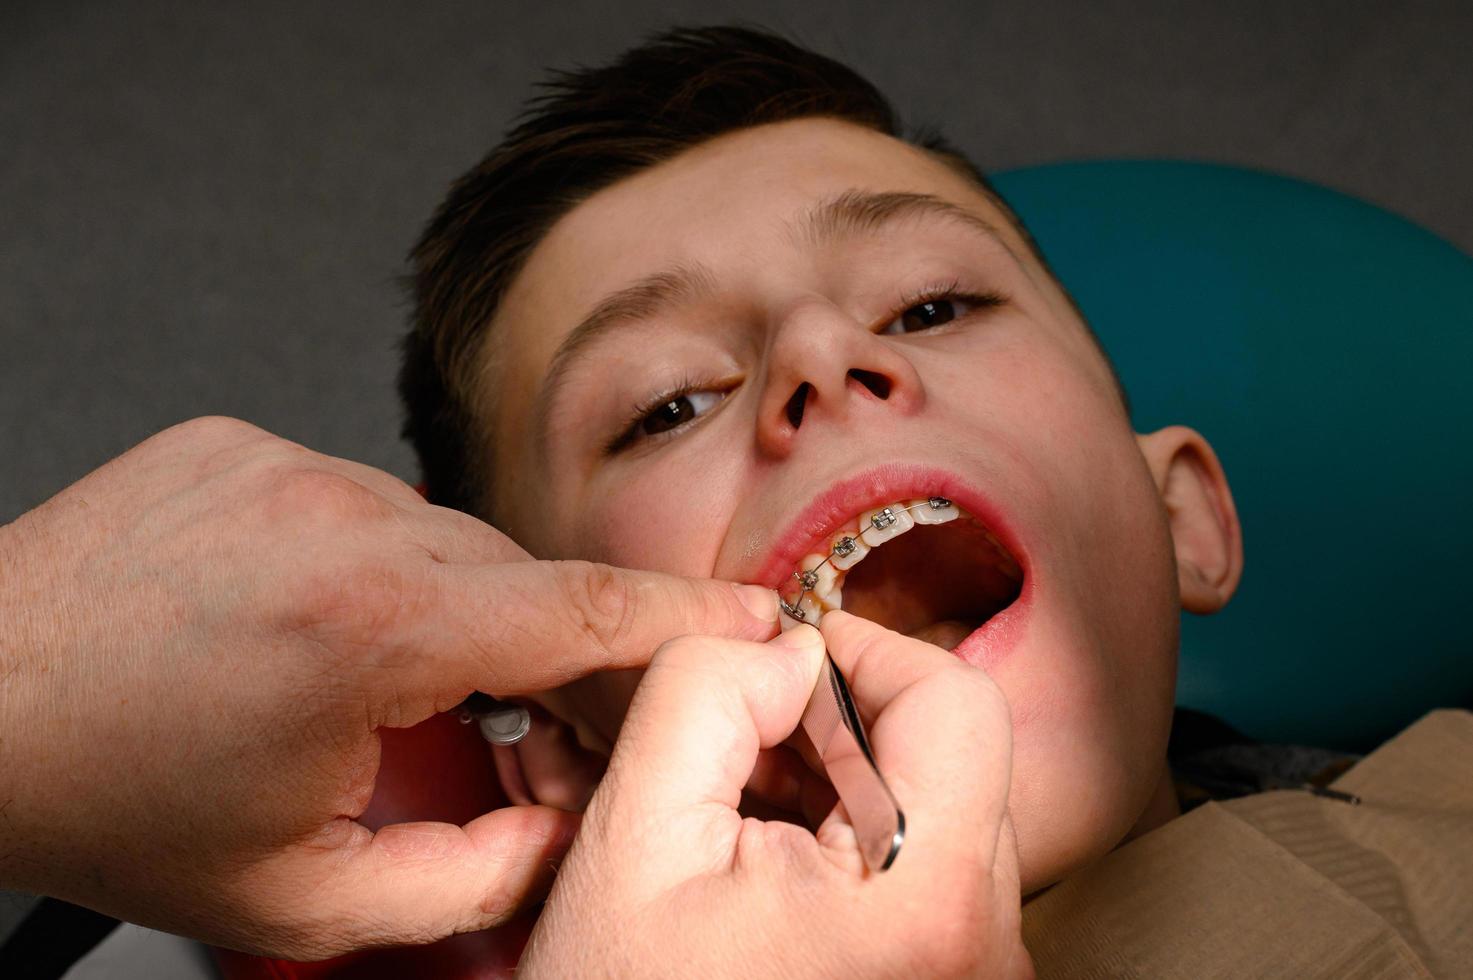 An orthodontist glues and fastens braces on the upper teeth of a schoolboy, aligning teeth with braces. photo